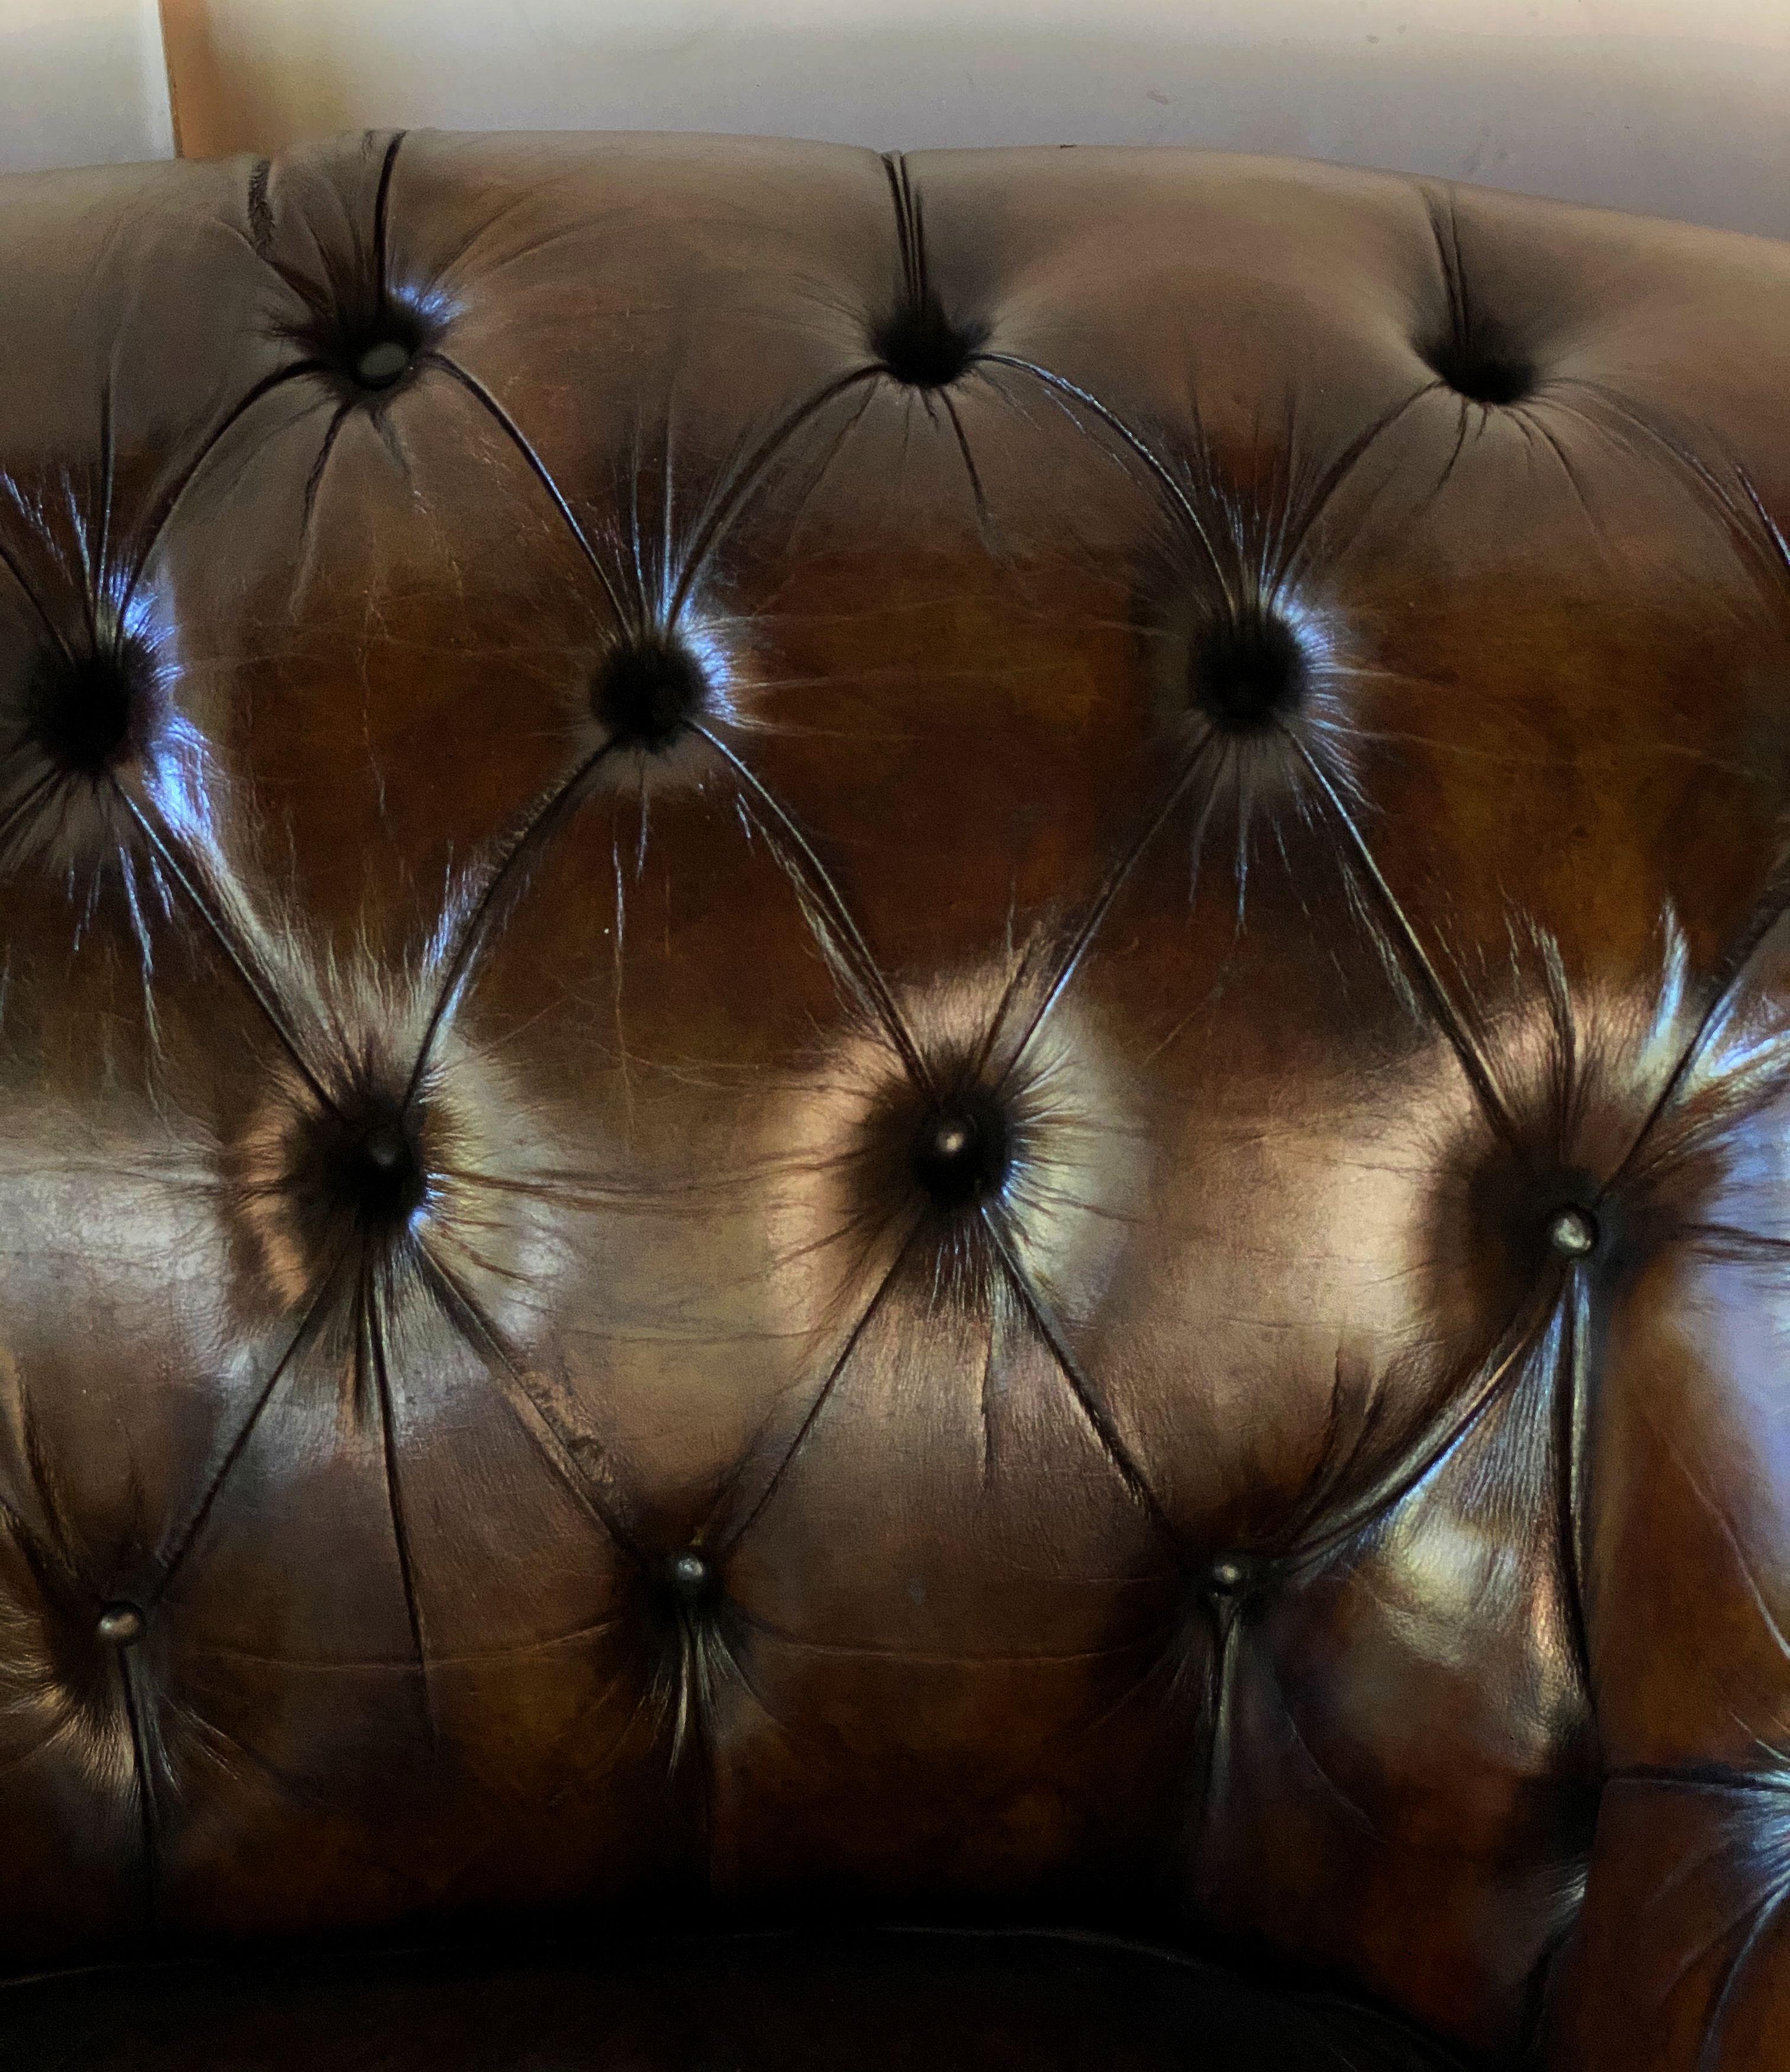 English Chesterfield Sofa of Tufted Leather 5